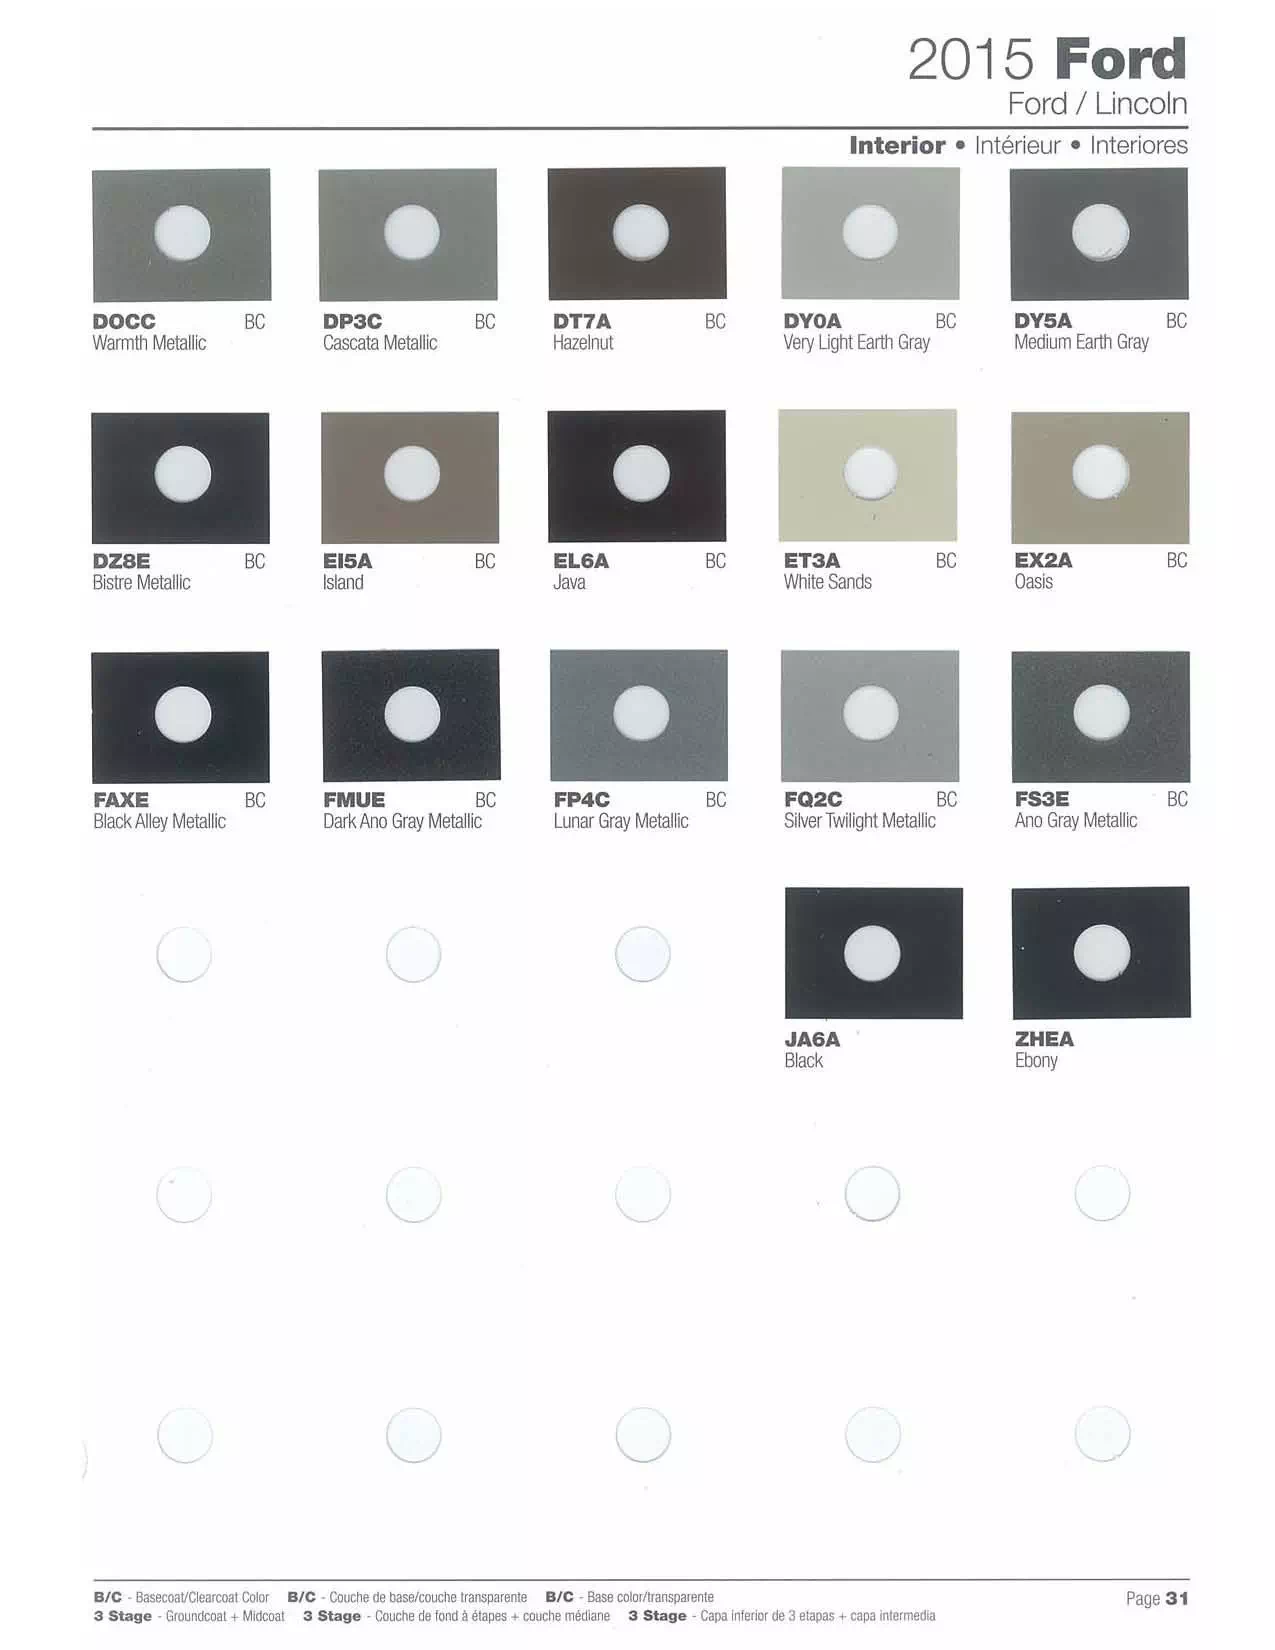 2015 Ford and Lincoln Vehicles Paint Codes and Color Swatches